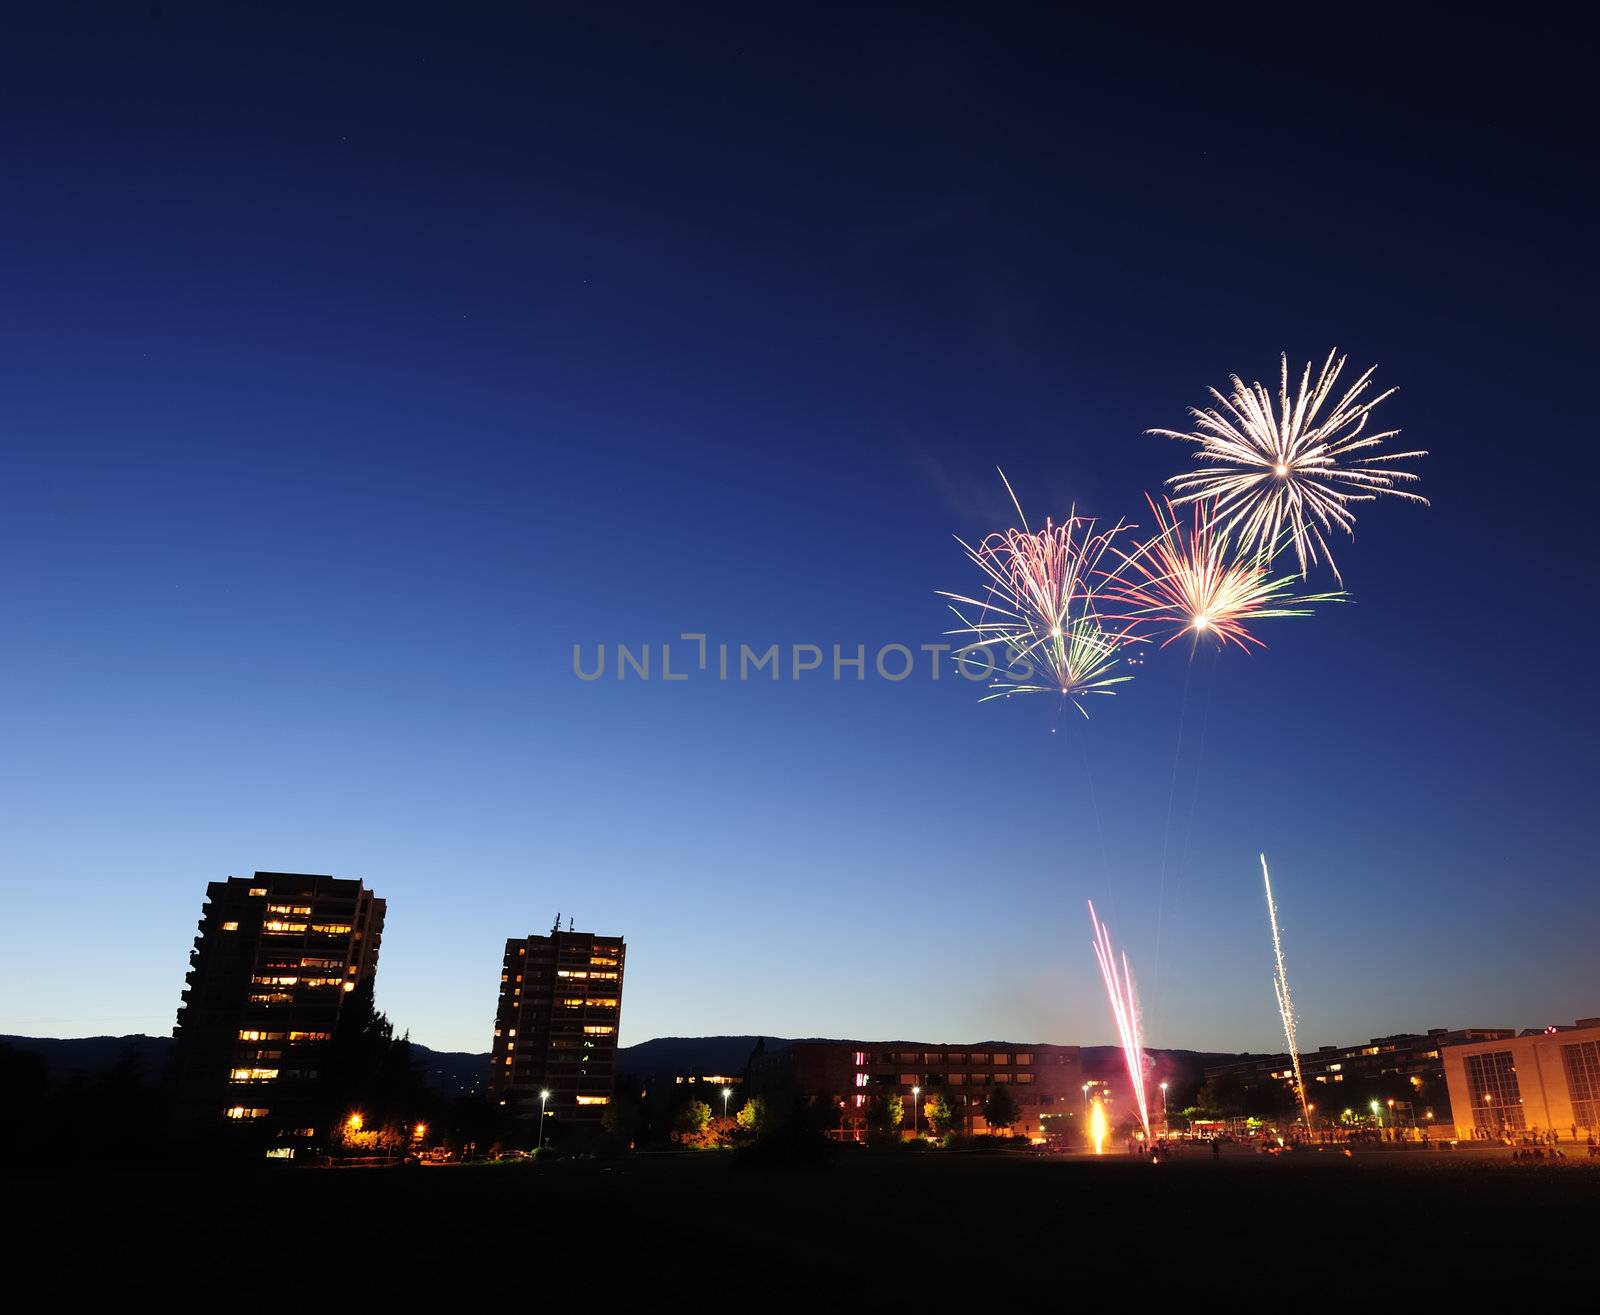 Firework bursts in the night sky, over a town. Space for text in the sky.